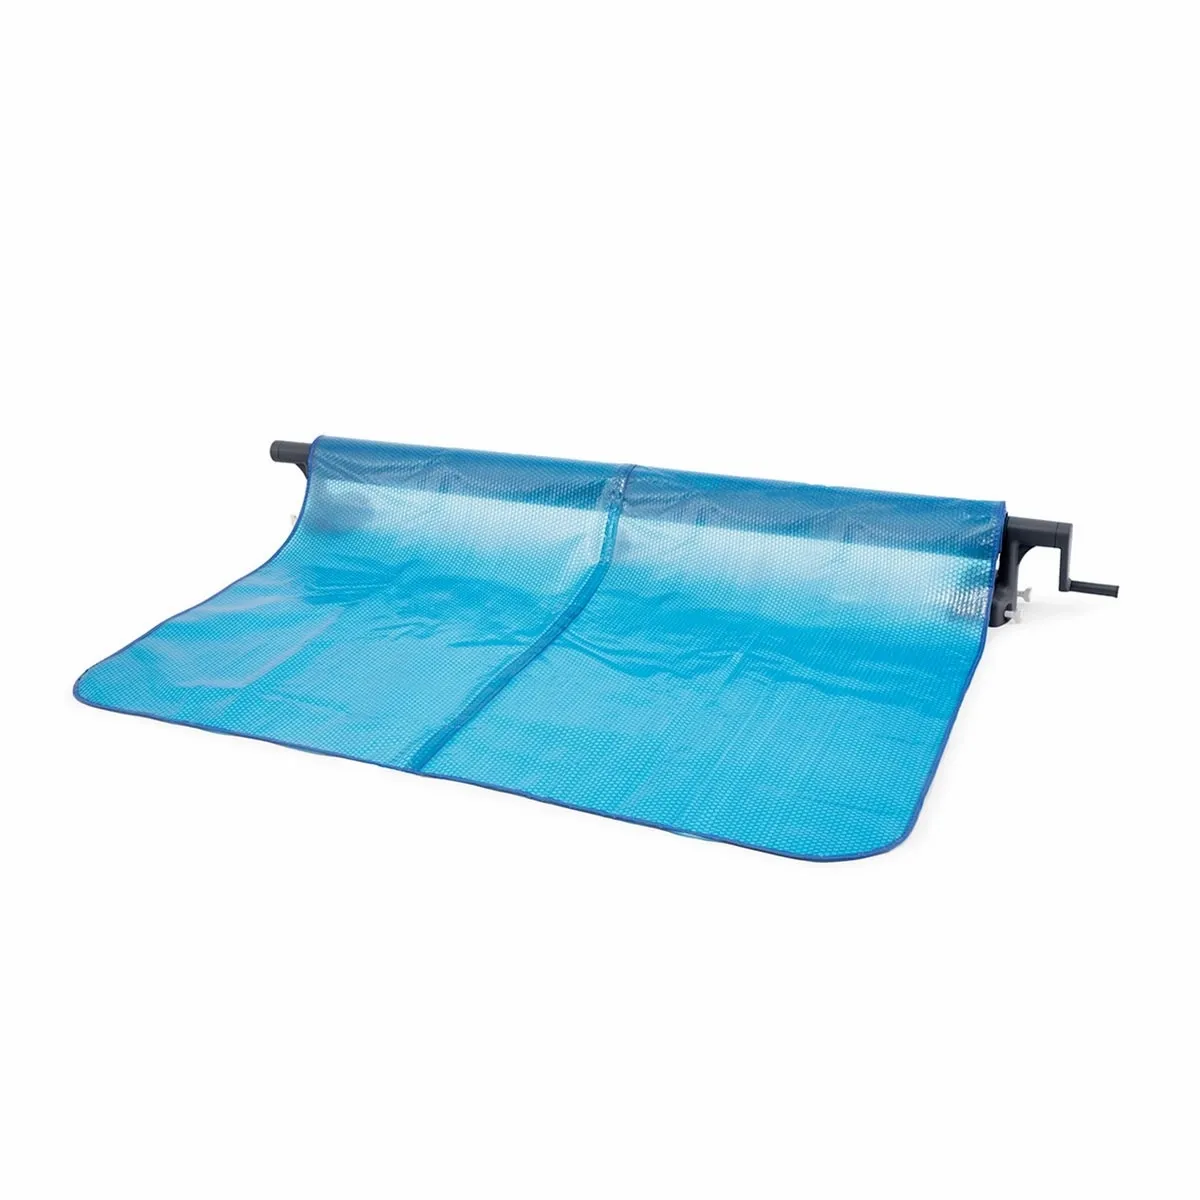 Intex cover roll-up system (adjustable in width)